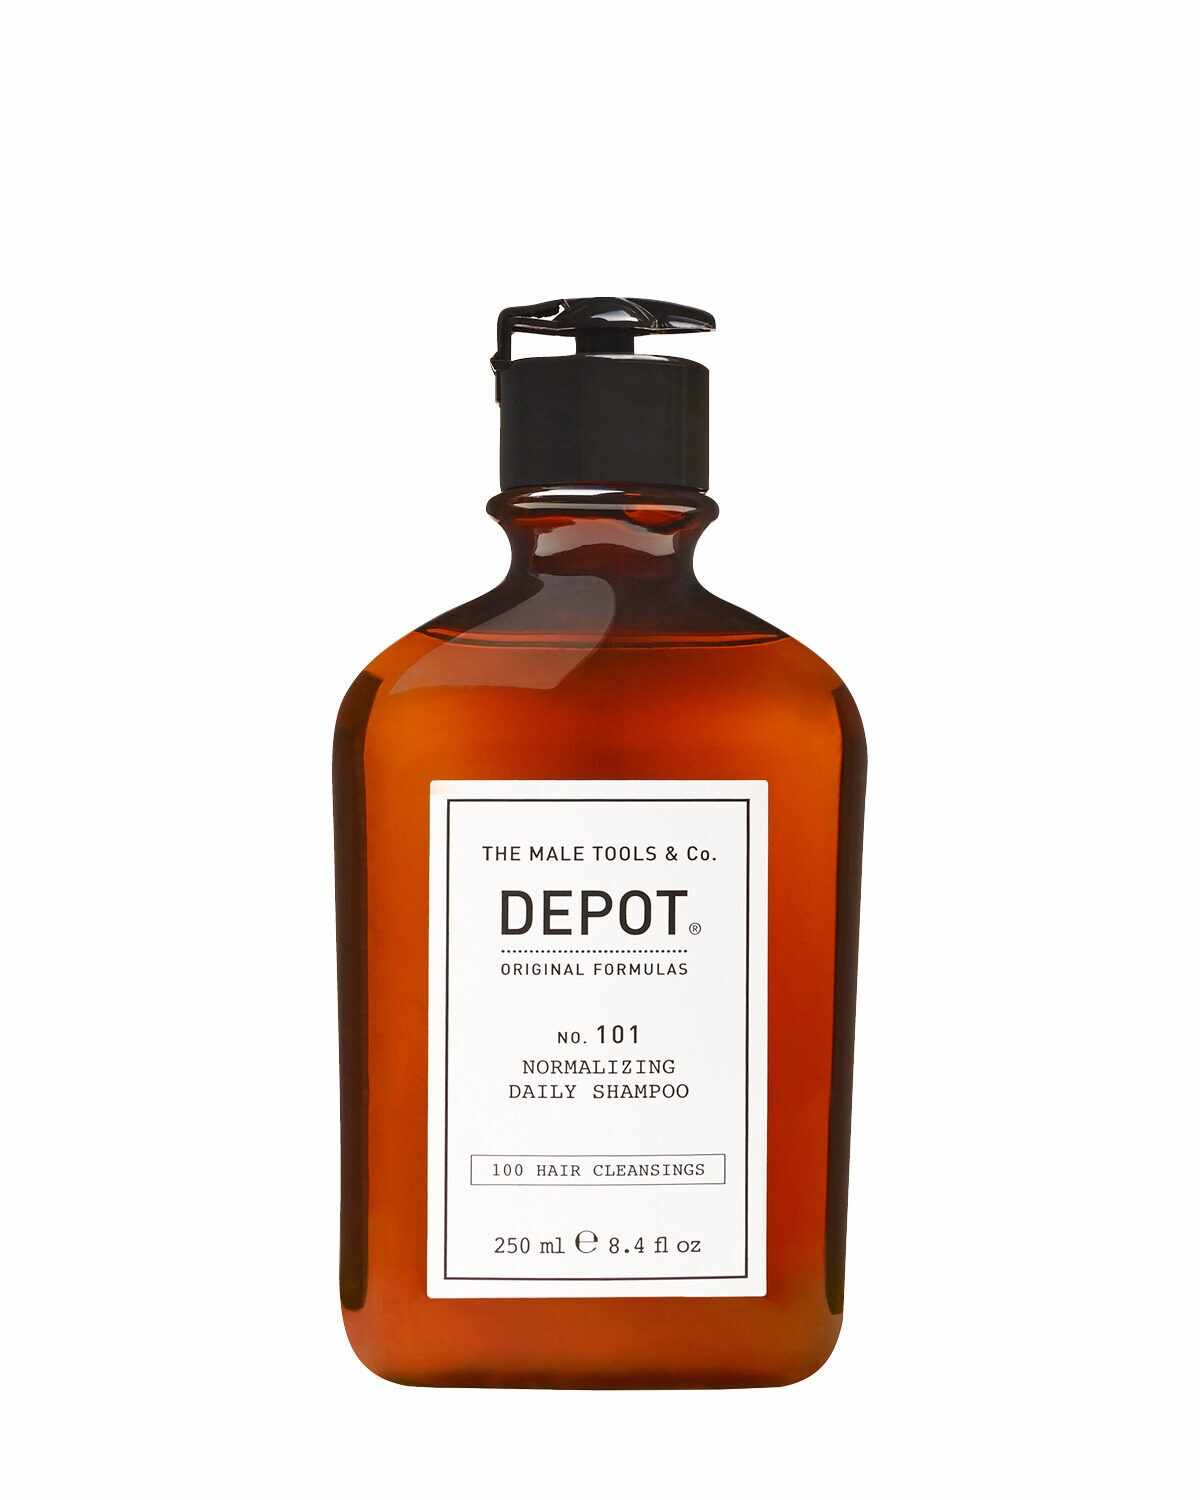 Depot, 100 Hair Cleansing No. 101, Botanical Complex, Hair Shampoo, Normalizing, 250 ml